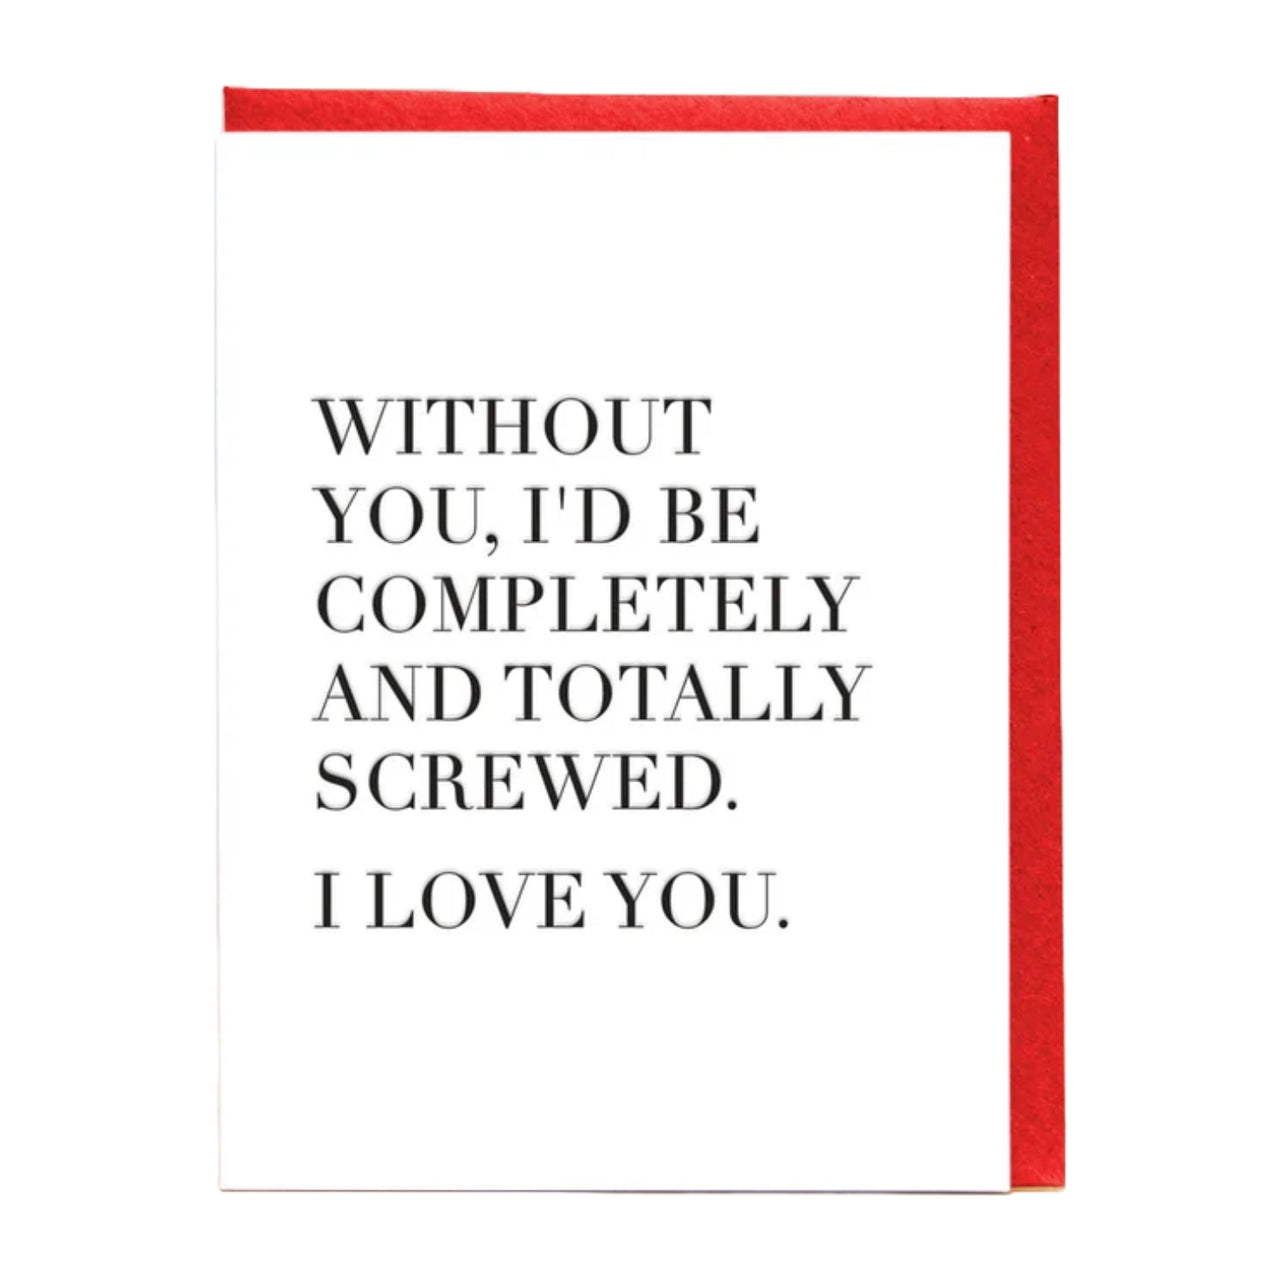 Totally Screwed Love You Letterpress Card